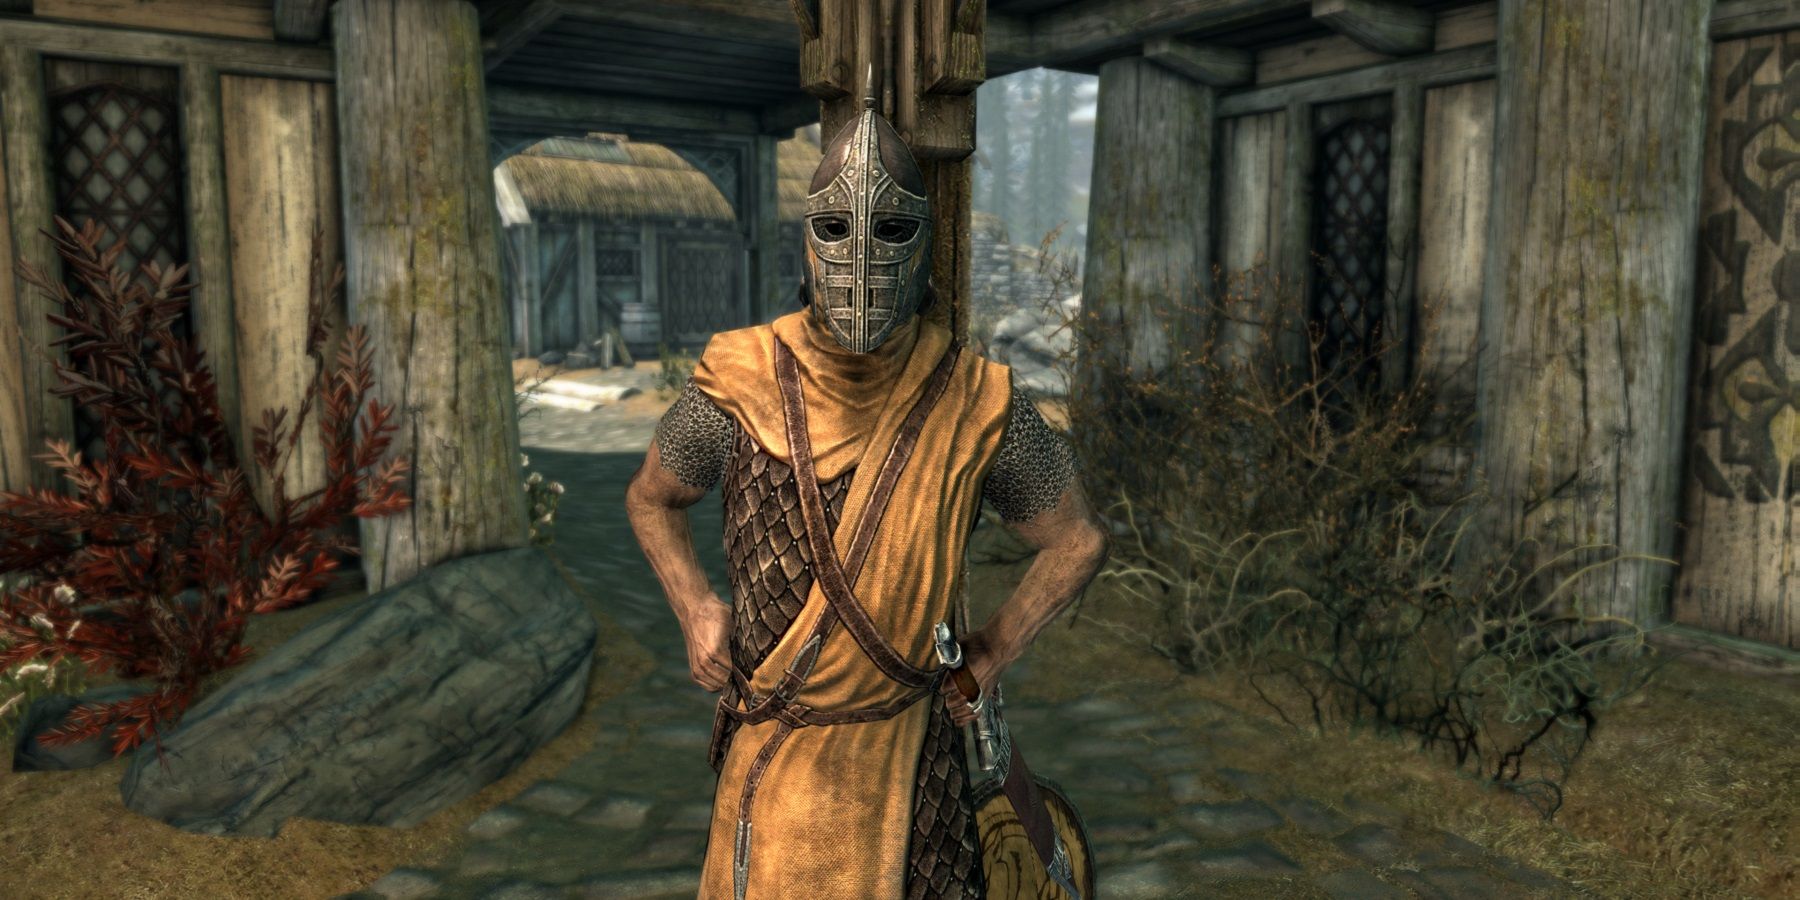 Image from The Elder Scrolls 5: skyrim showing a guard in Whiterun.